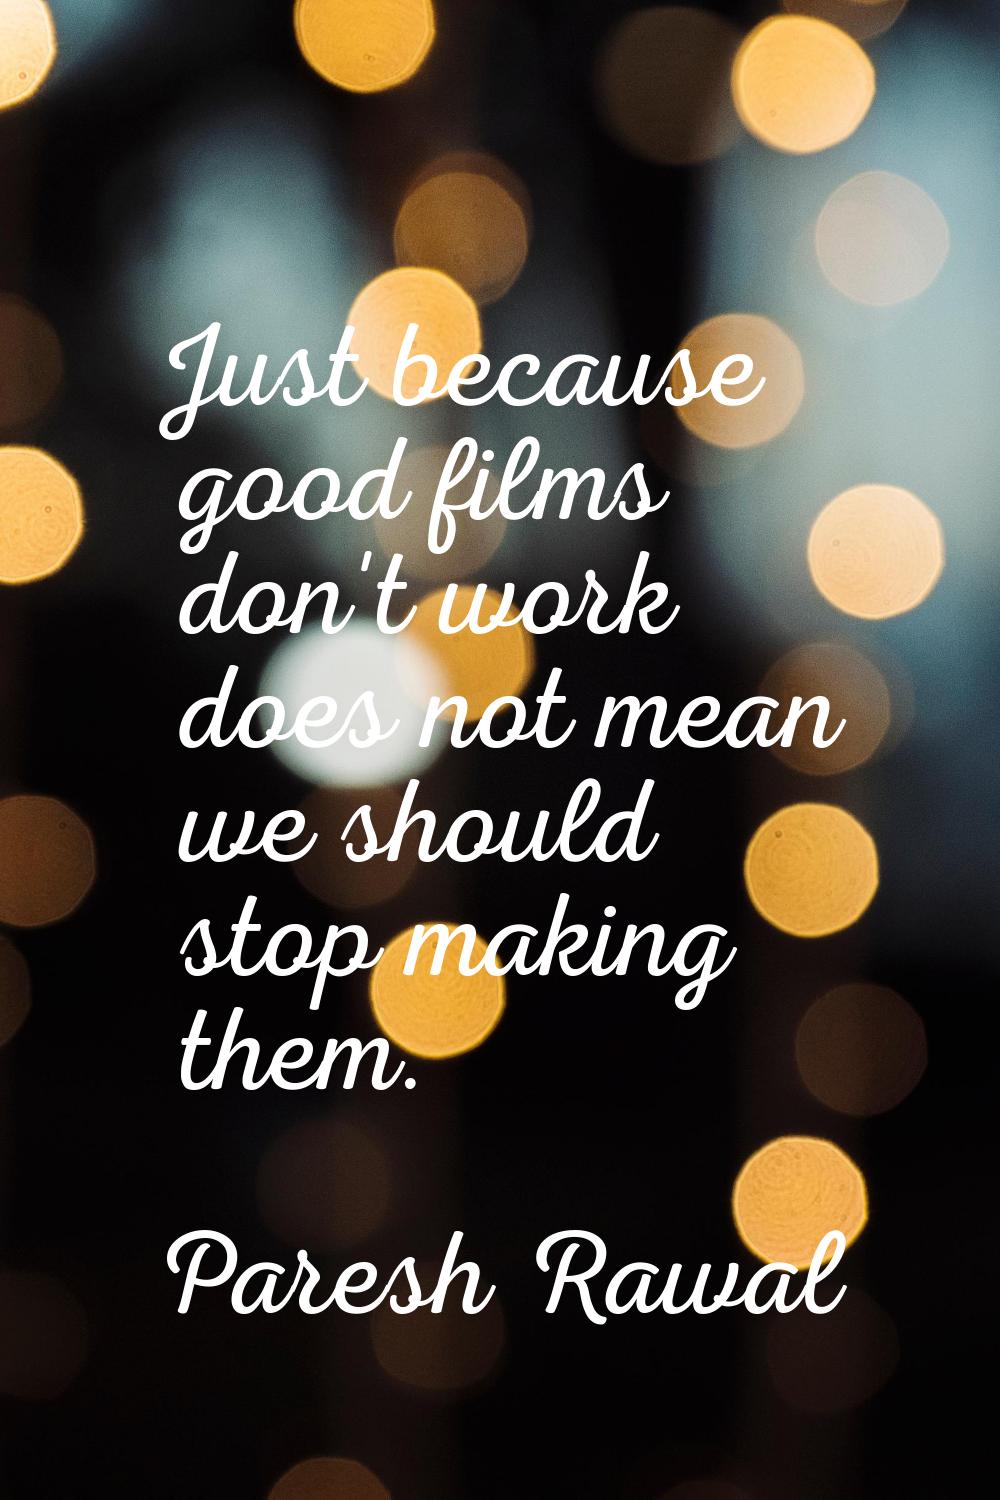 Just because good films don't work does not mean we should stop making them.